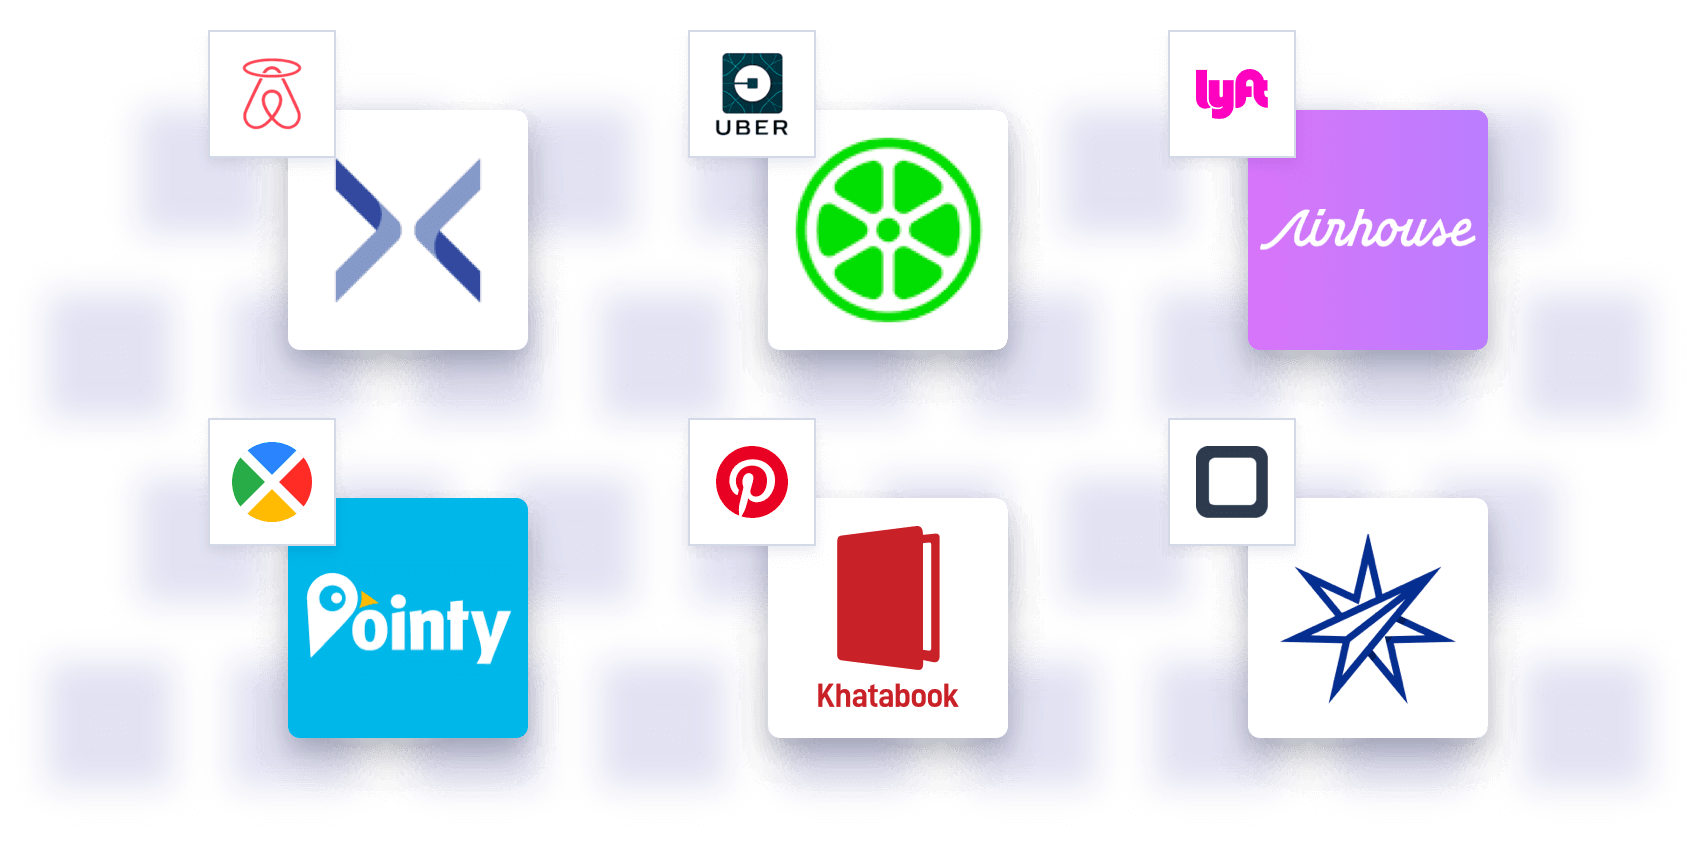 AngelList Alumni Syndicates have invested $30M in over 90 deals, including Airhouse, Astra, Iggy, KhataBook, Lime, Pointy, and more